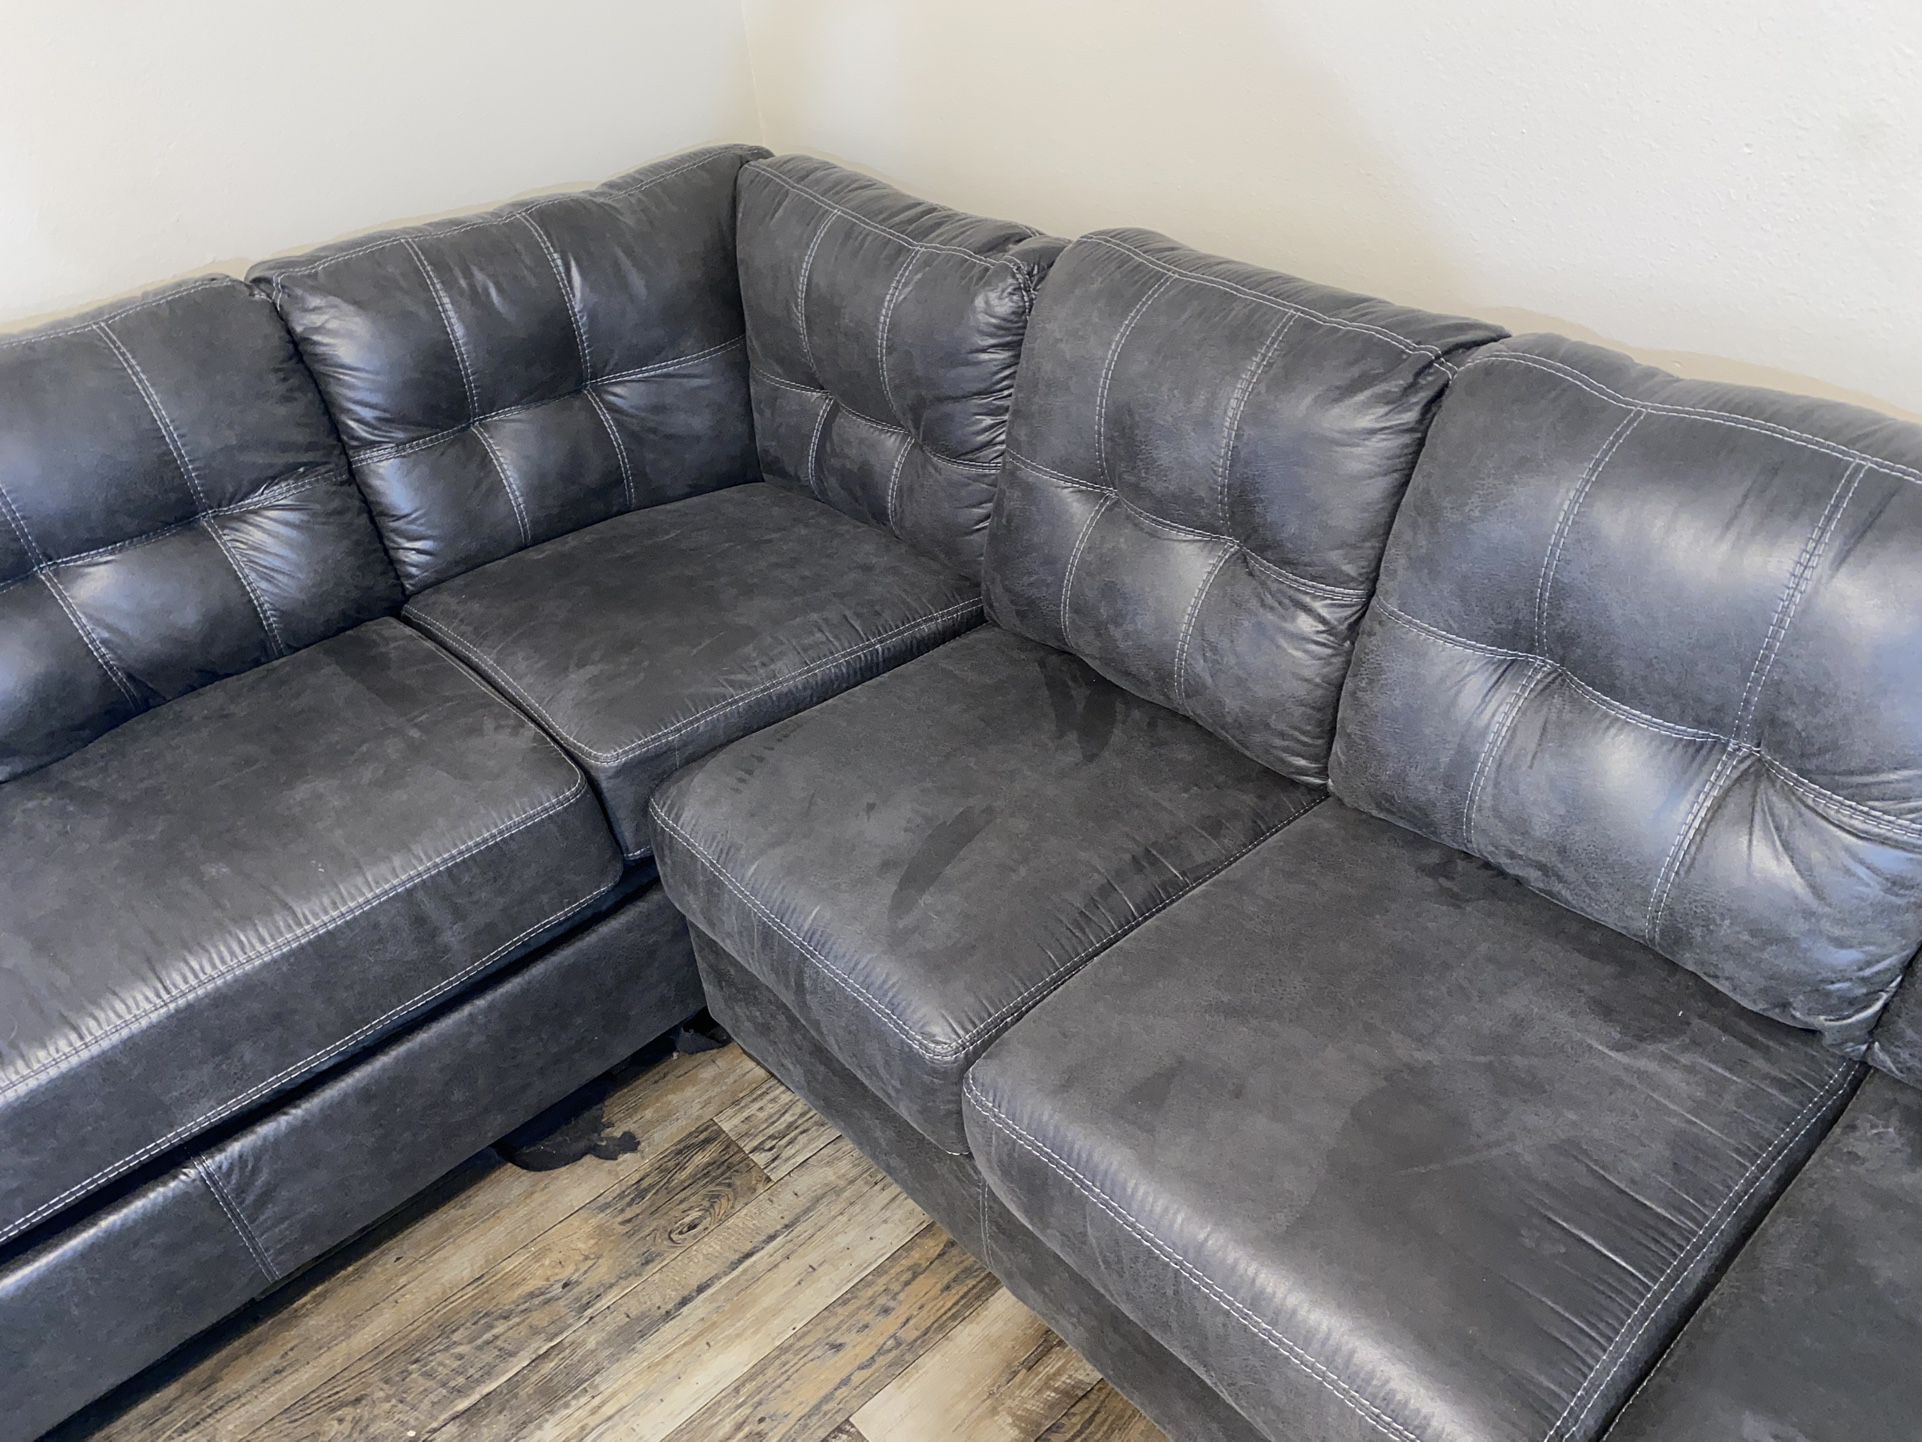 Gray L Shaped Couch 